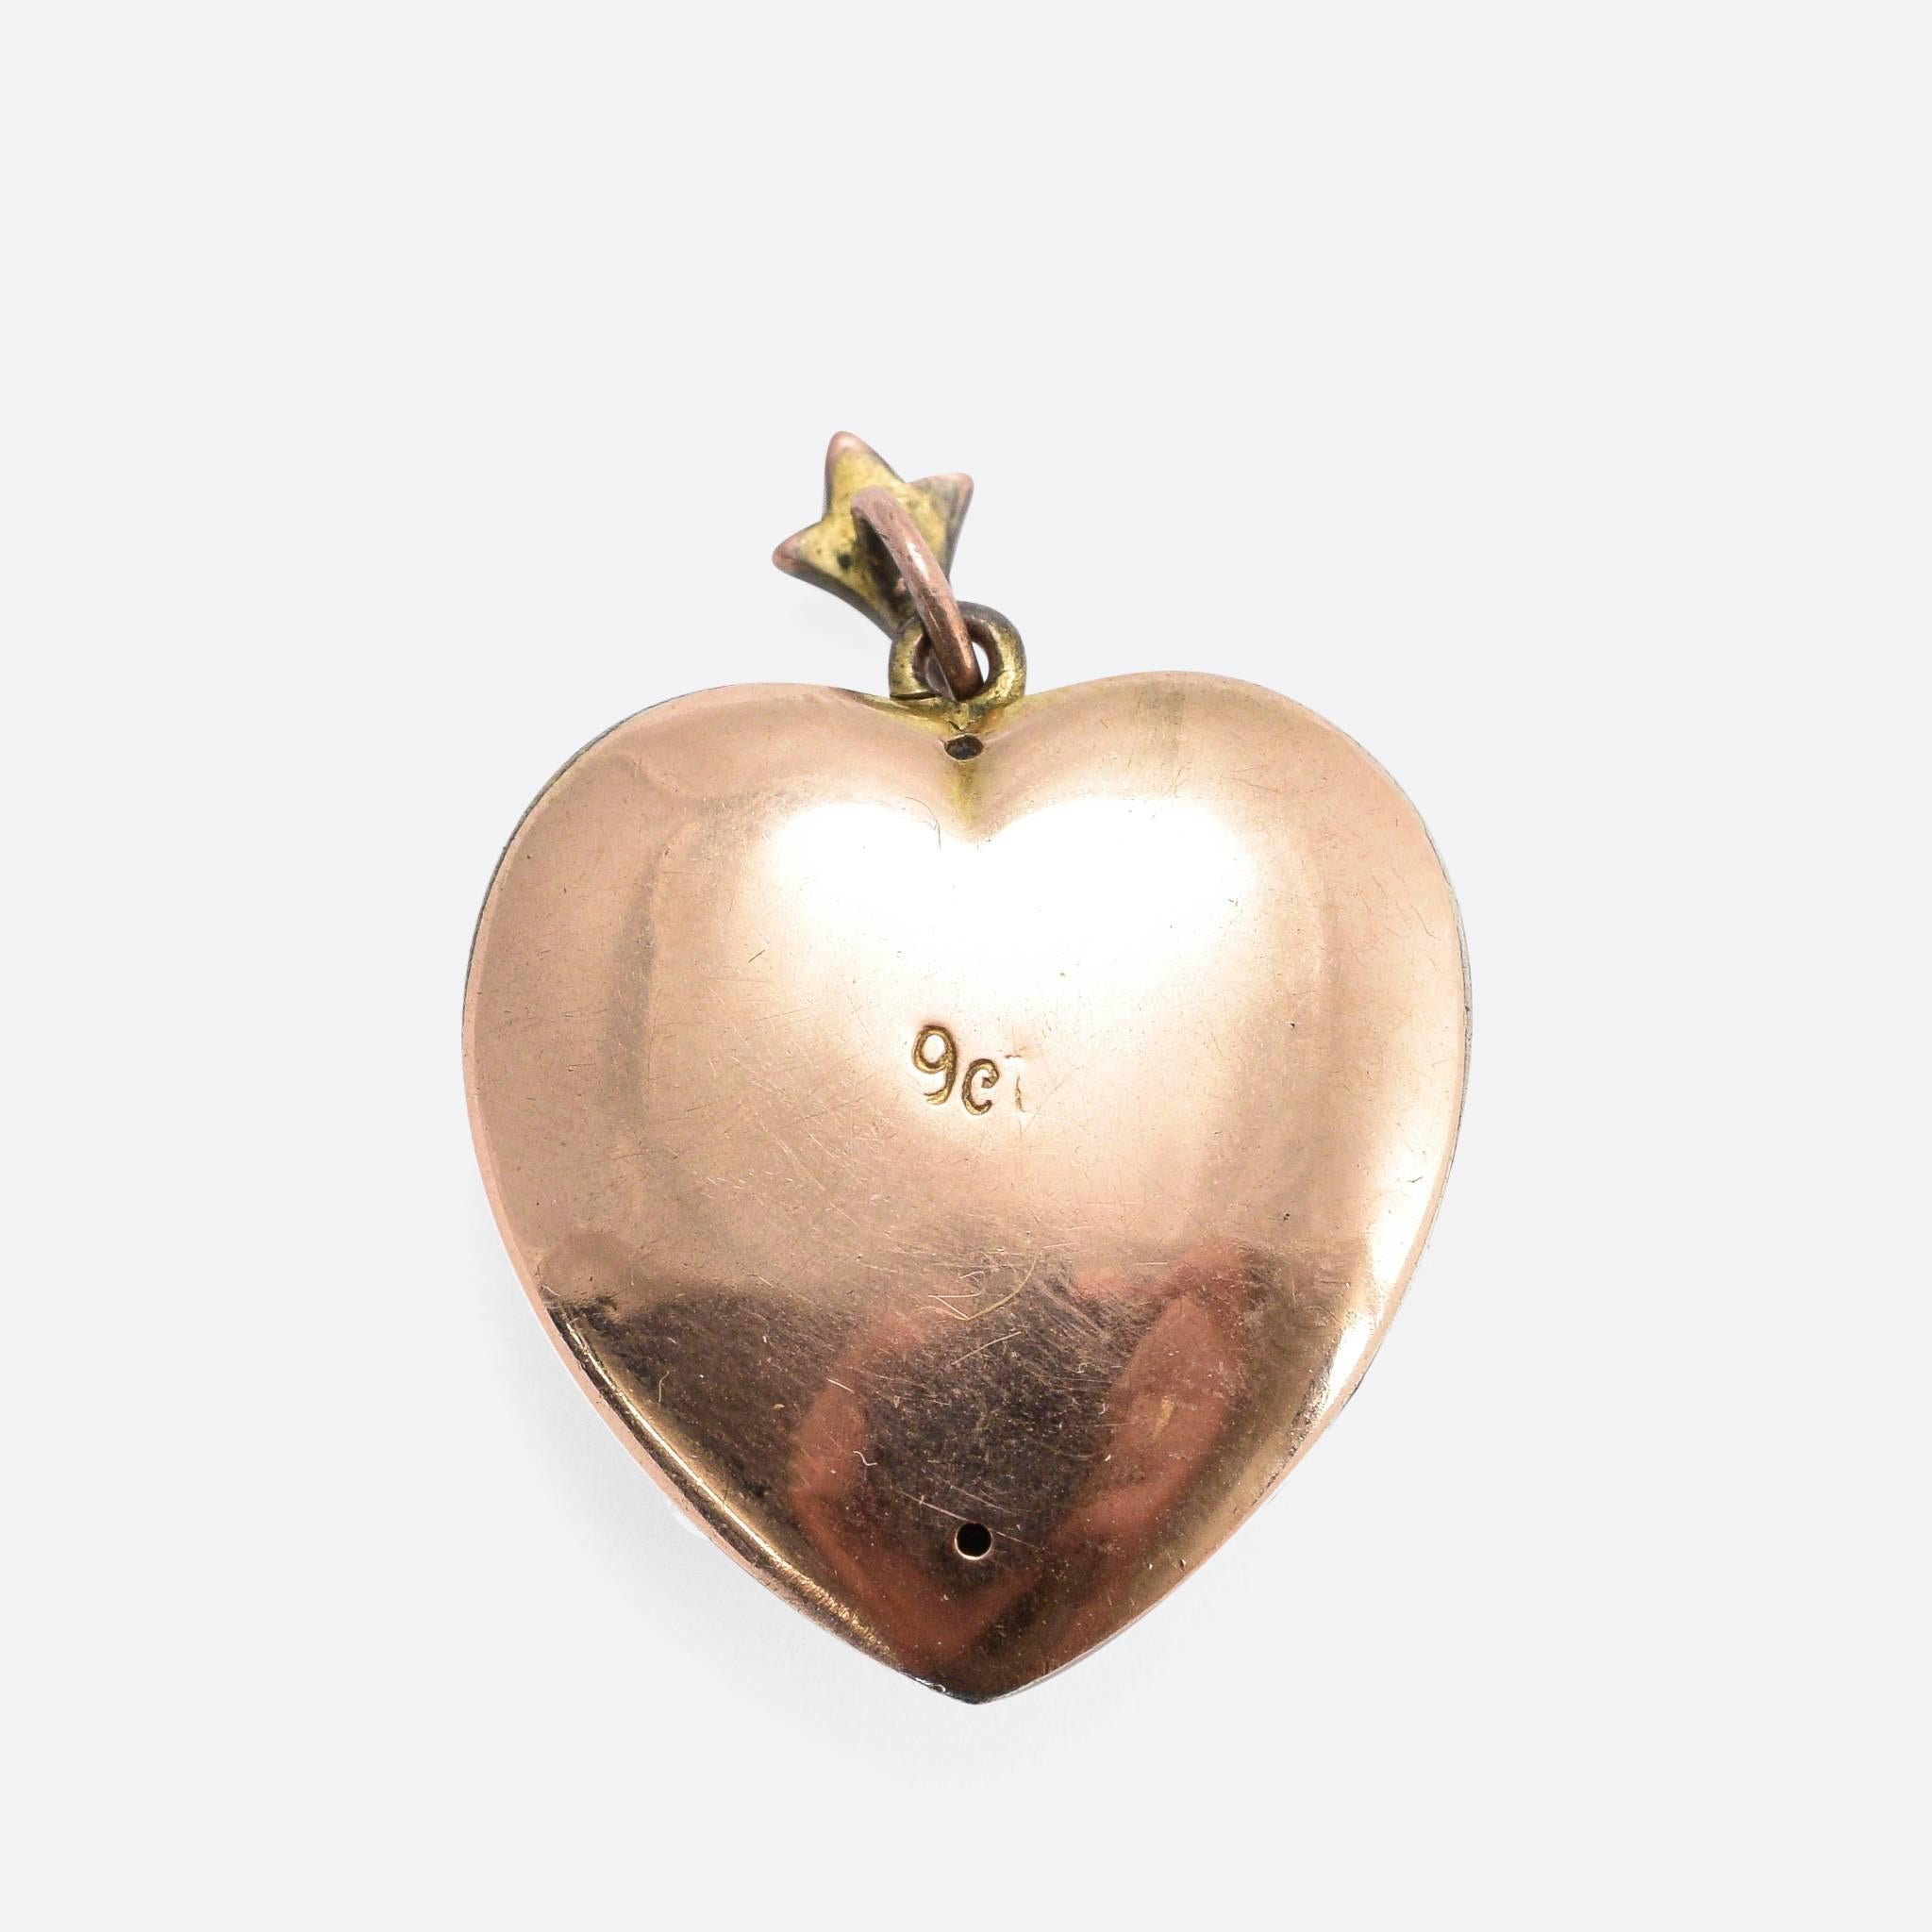 This beautiful antique heart pendant is pavé set with pearls, and a cute pink paste heart motif. It's modelled in 9k gold, with the original pearl-set bail. An attractive late Victorian piece, unusual with the flower detail.